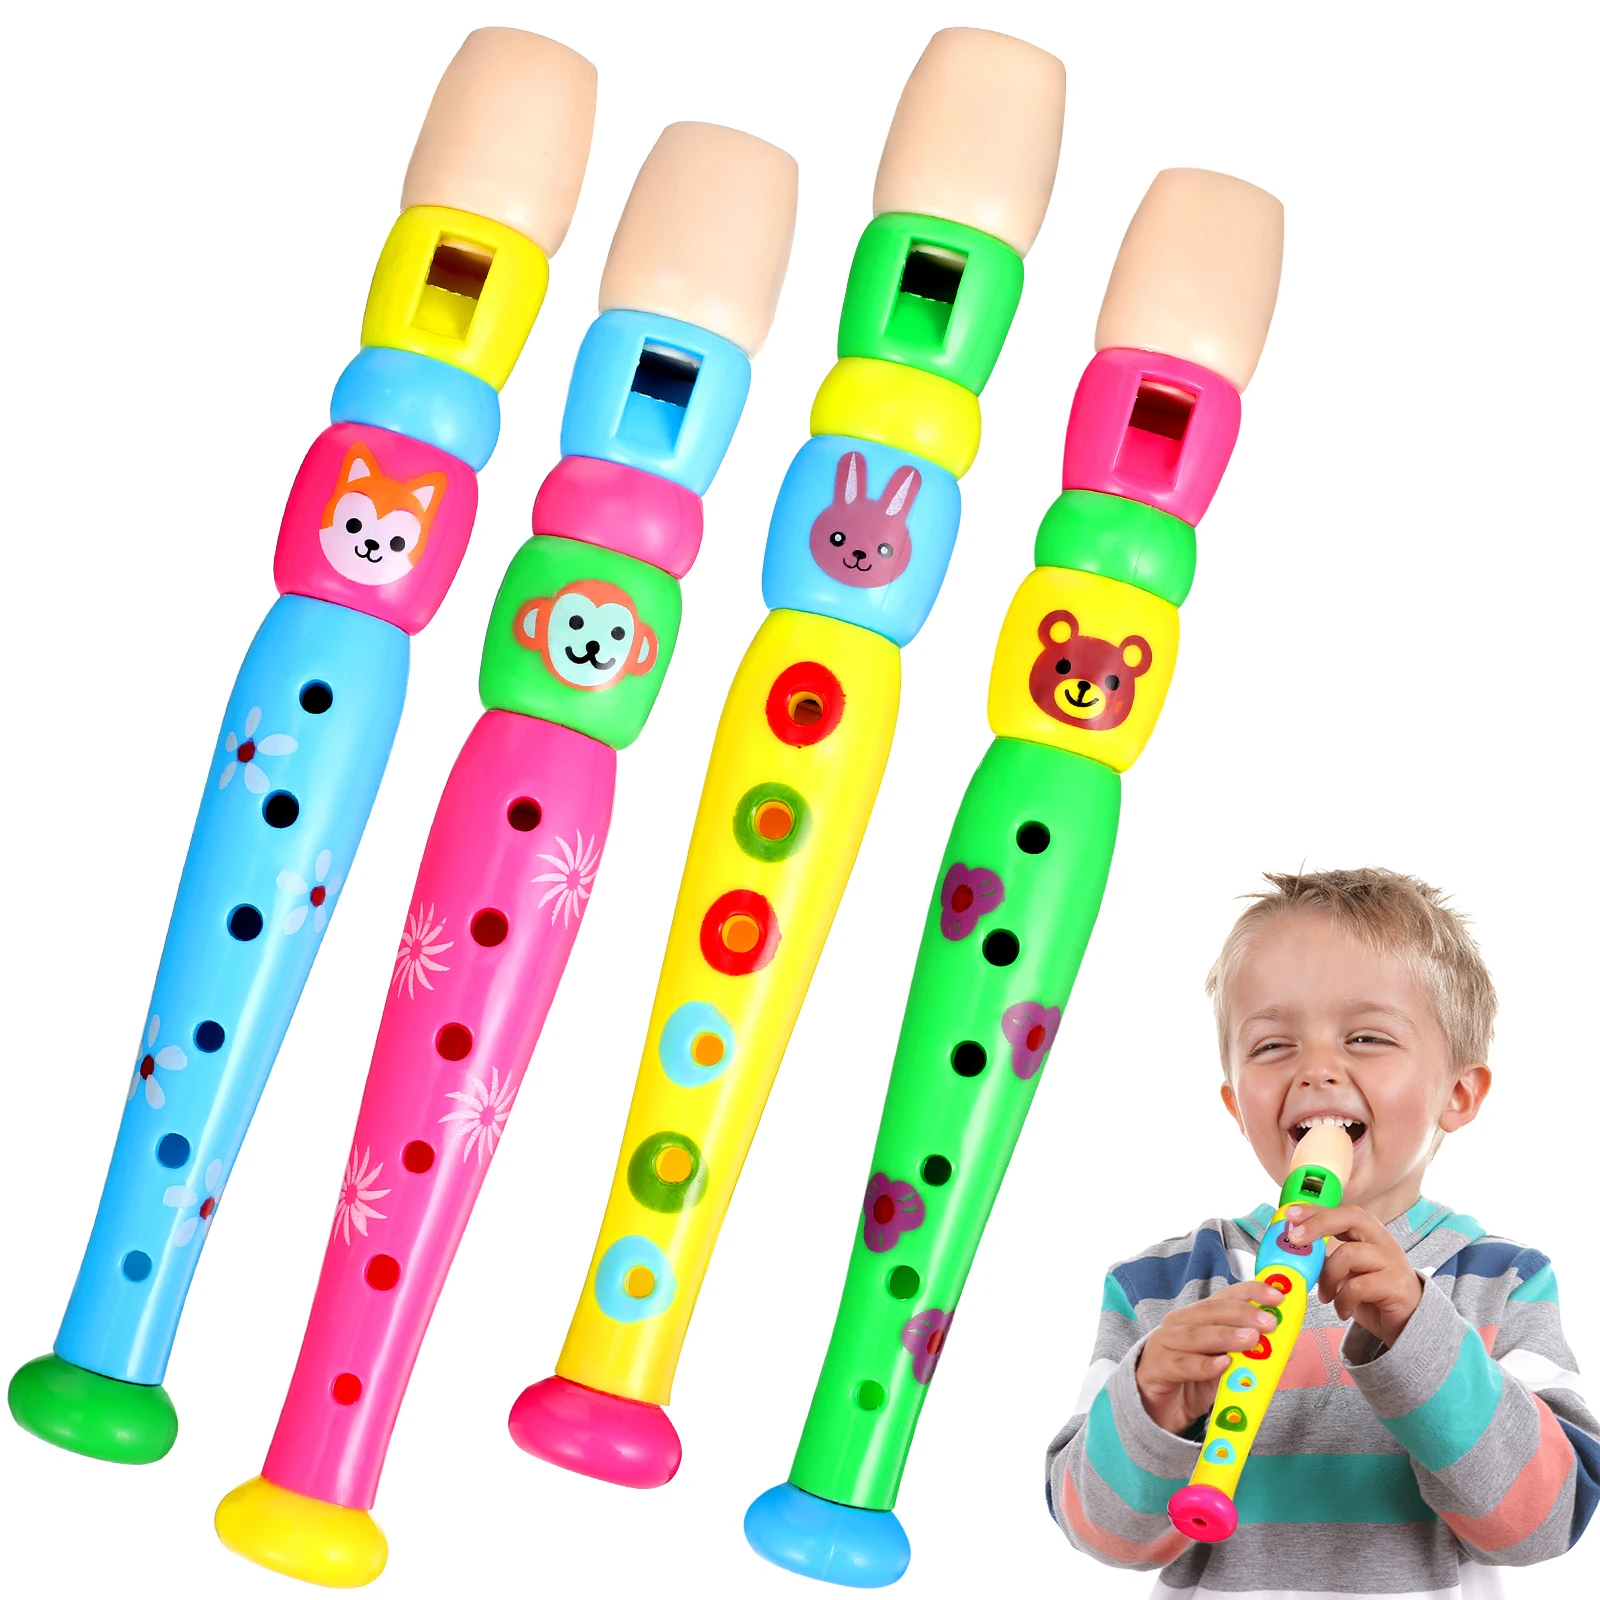 

4pcs 6-Holes Recorder Flute Musical Instruments Early Educational Develop Toys For Children Gifts Random Color